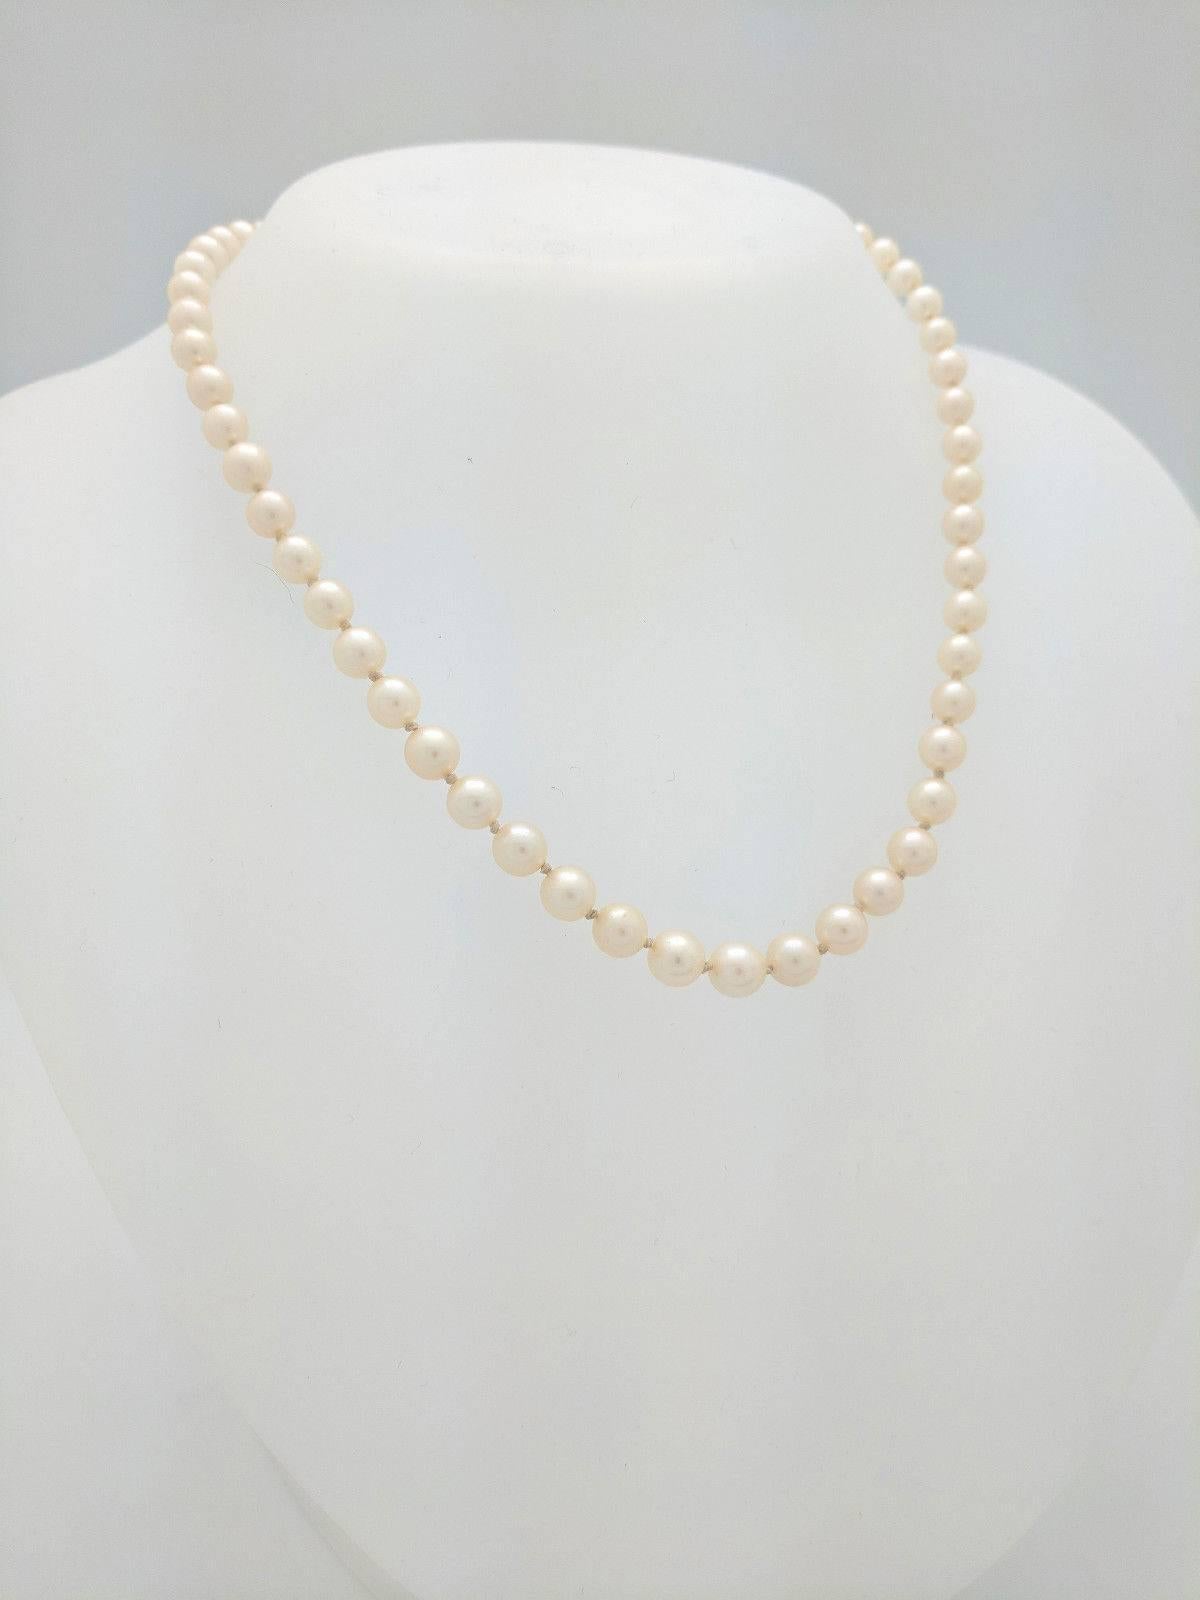 Early Victorian 14 Karat White Gold Graduating Cultured Pearl Necklace